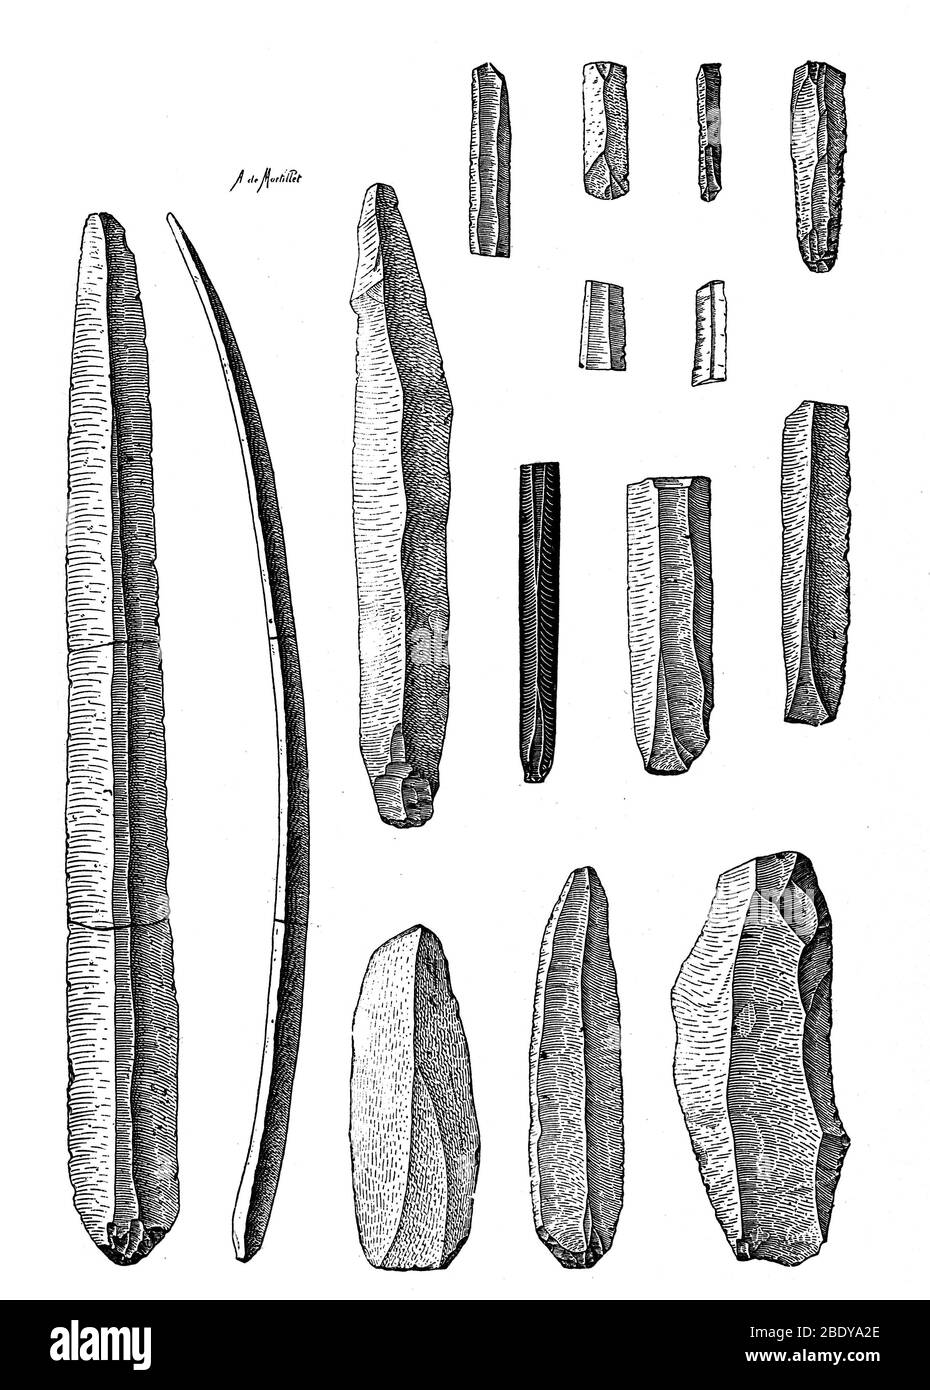 Neolithic Fint Flakes and Blades, Illustration Stock Photo